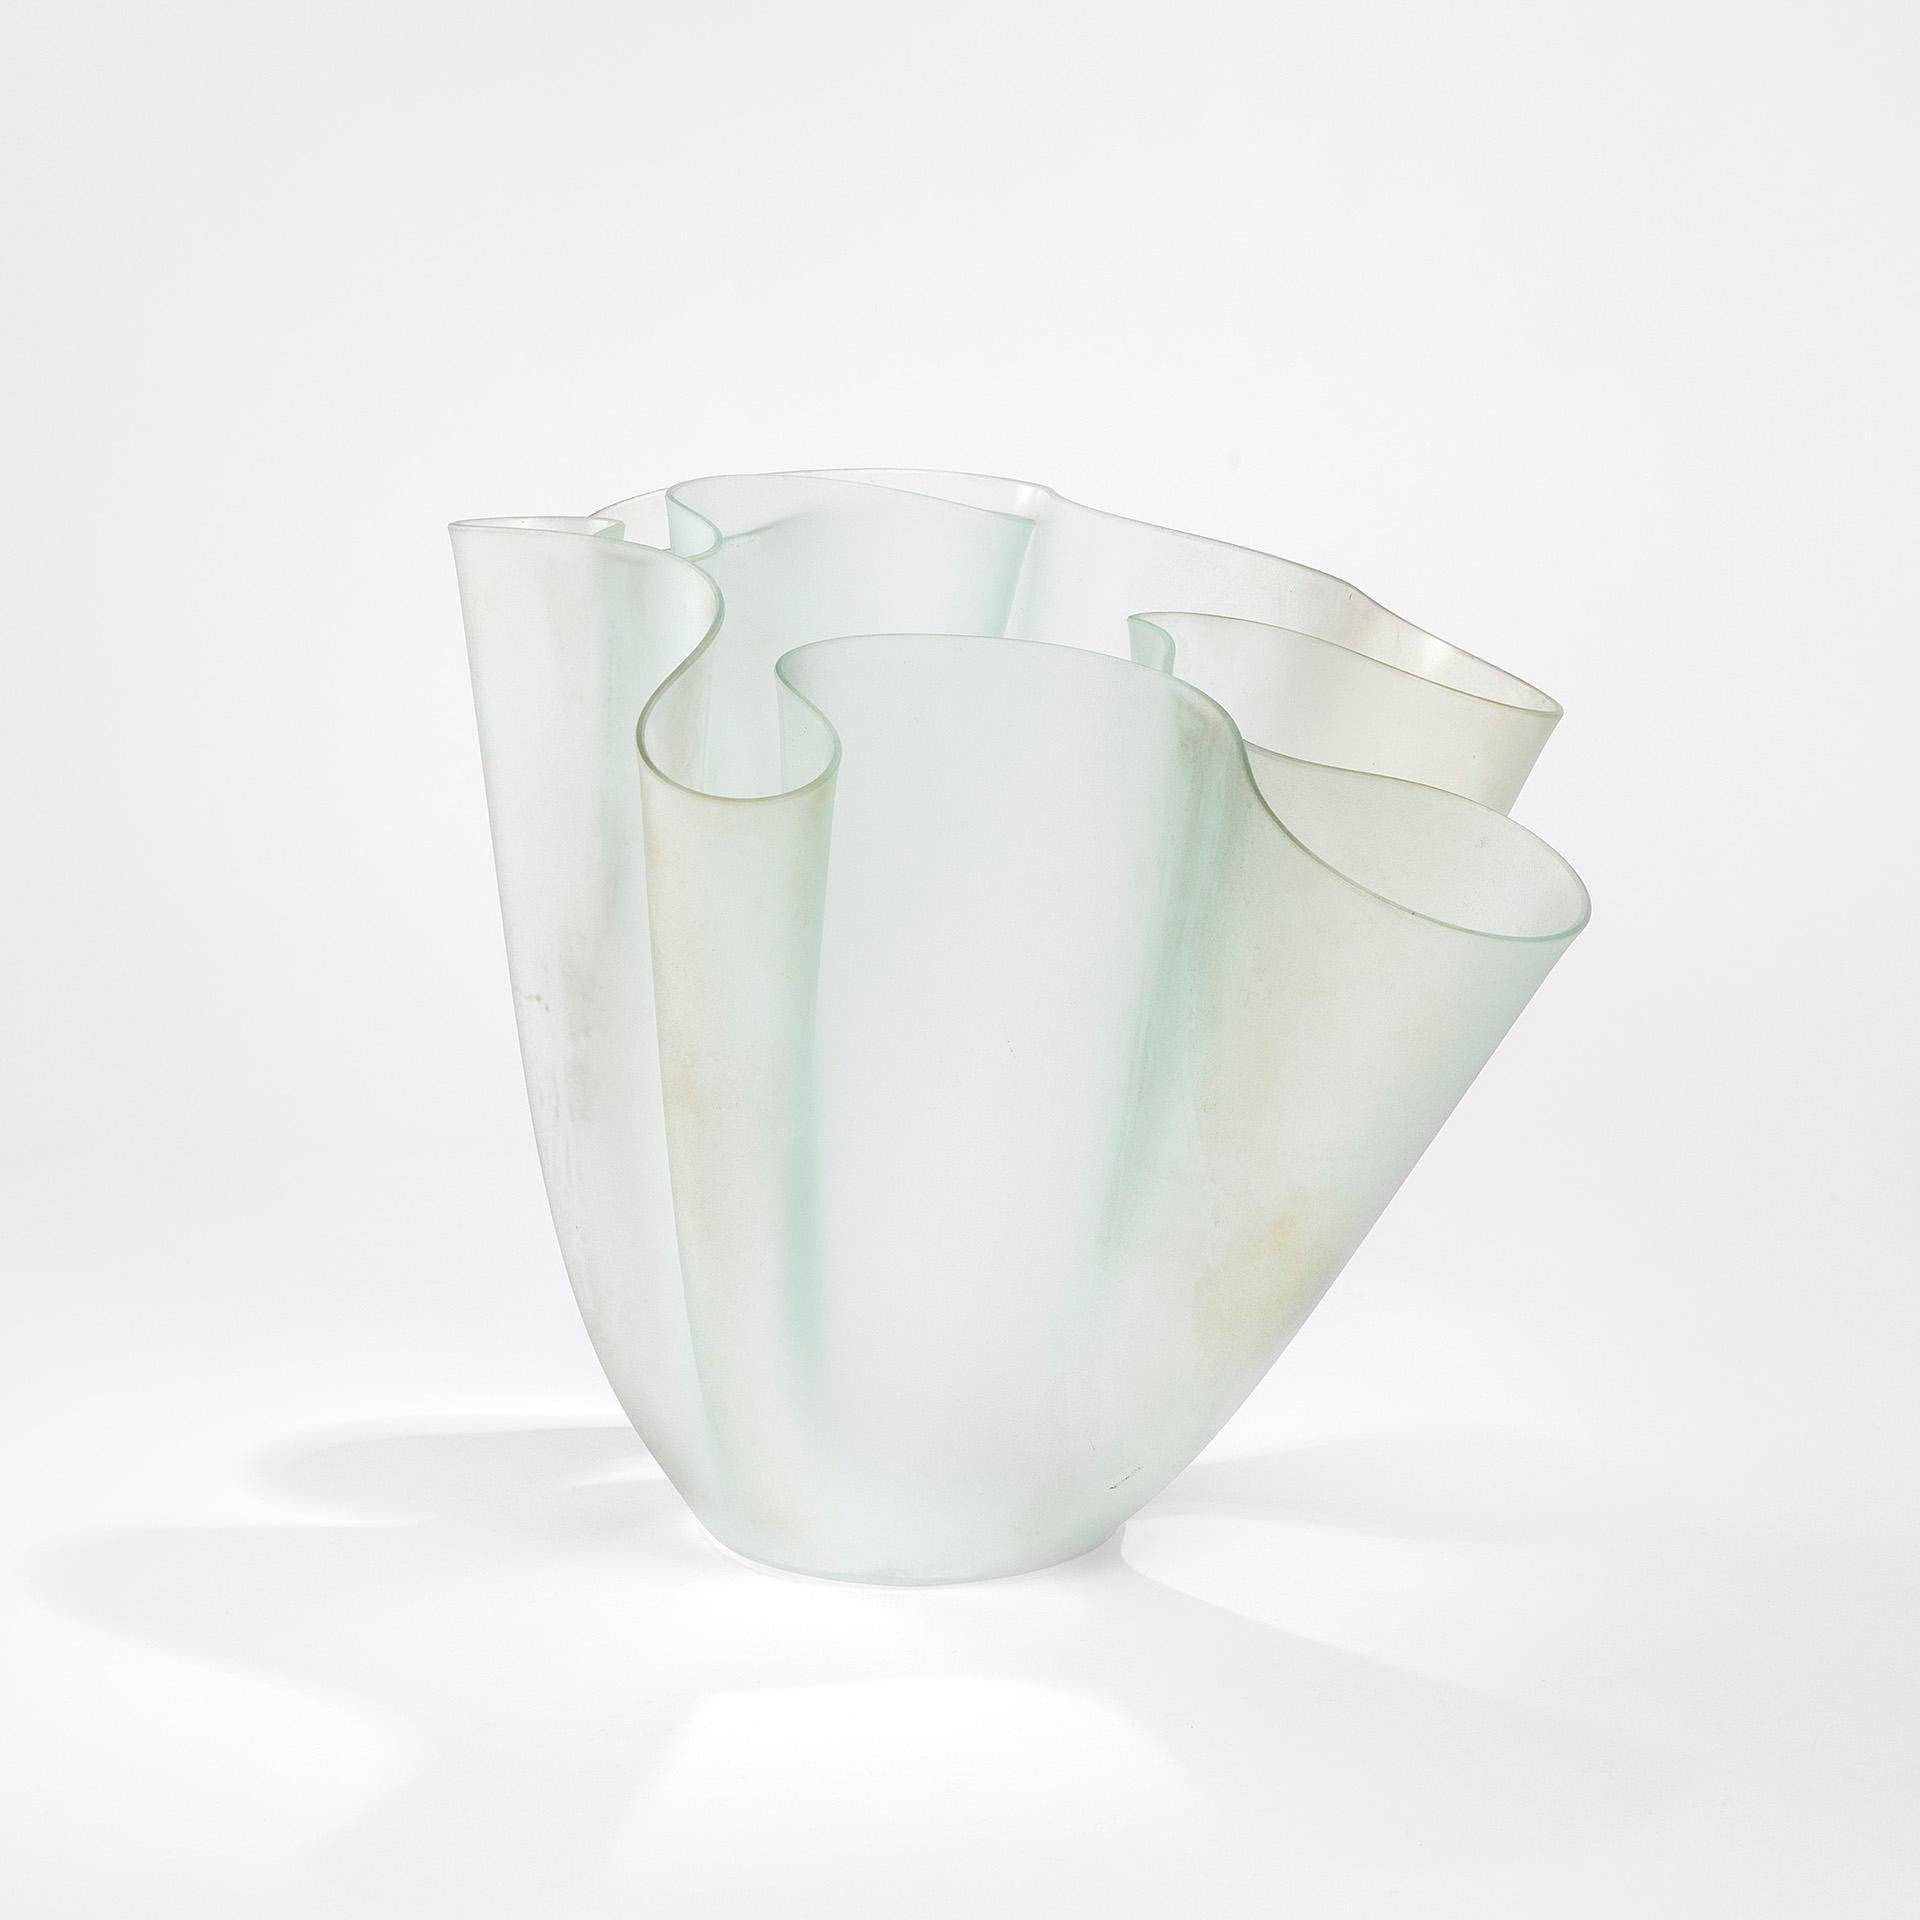 After an apprenticeship with the glassmaker Giannotti Pietro Chiesa opened his own glass workshop in 1921. In the early 1920s he participated in the Monza Biennale, the Venice Biennale, the Exposition des Arts Décoratifs in Paris, and exhibitions in